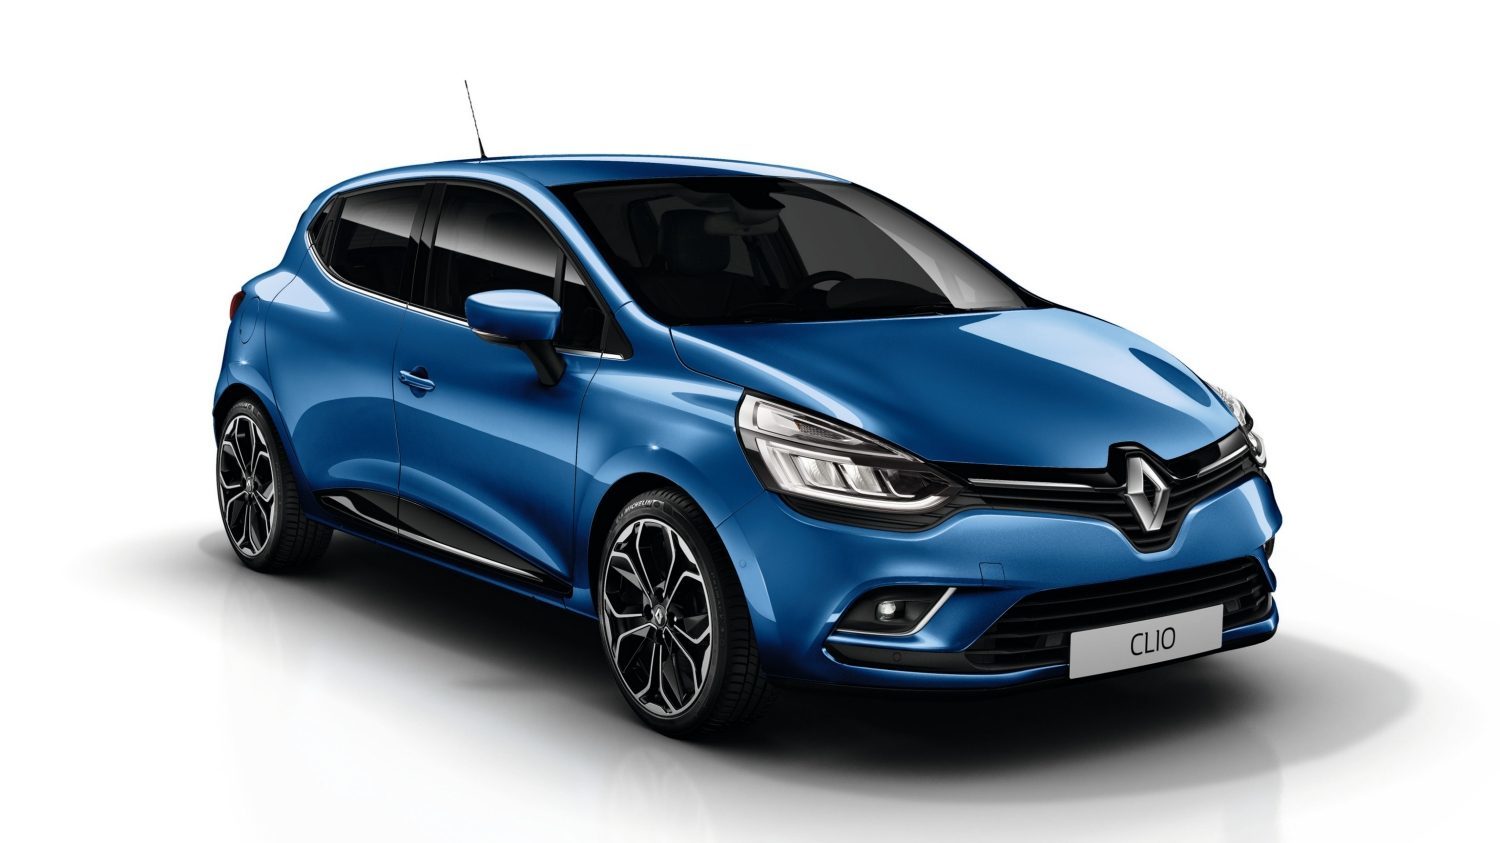 Police appeal after stolen Renault Clio car in Banchory